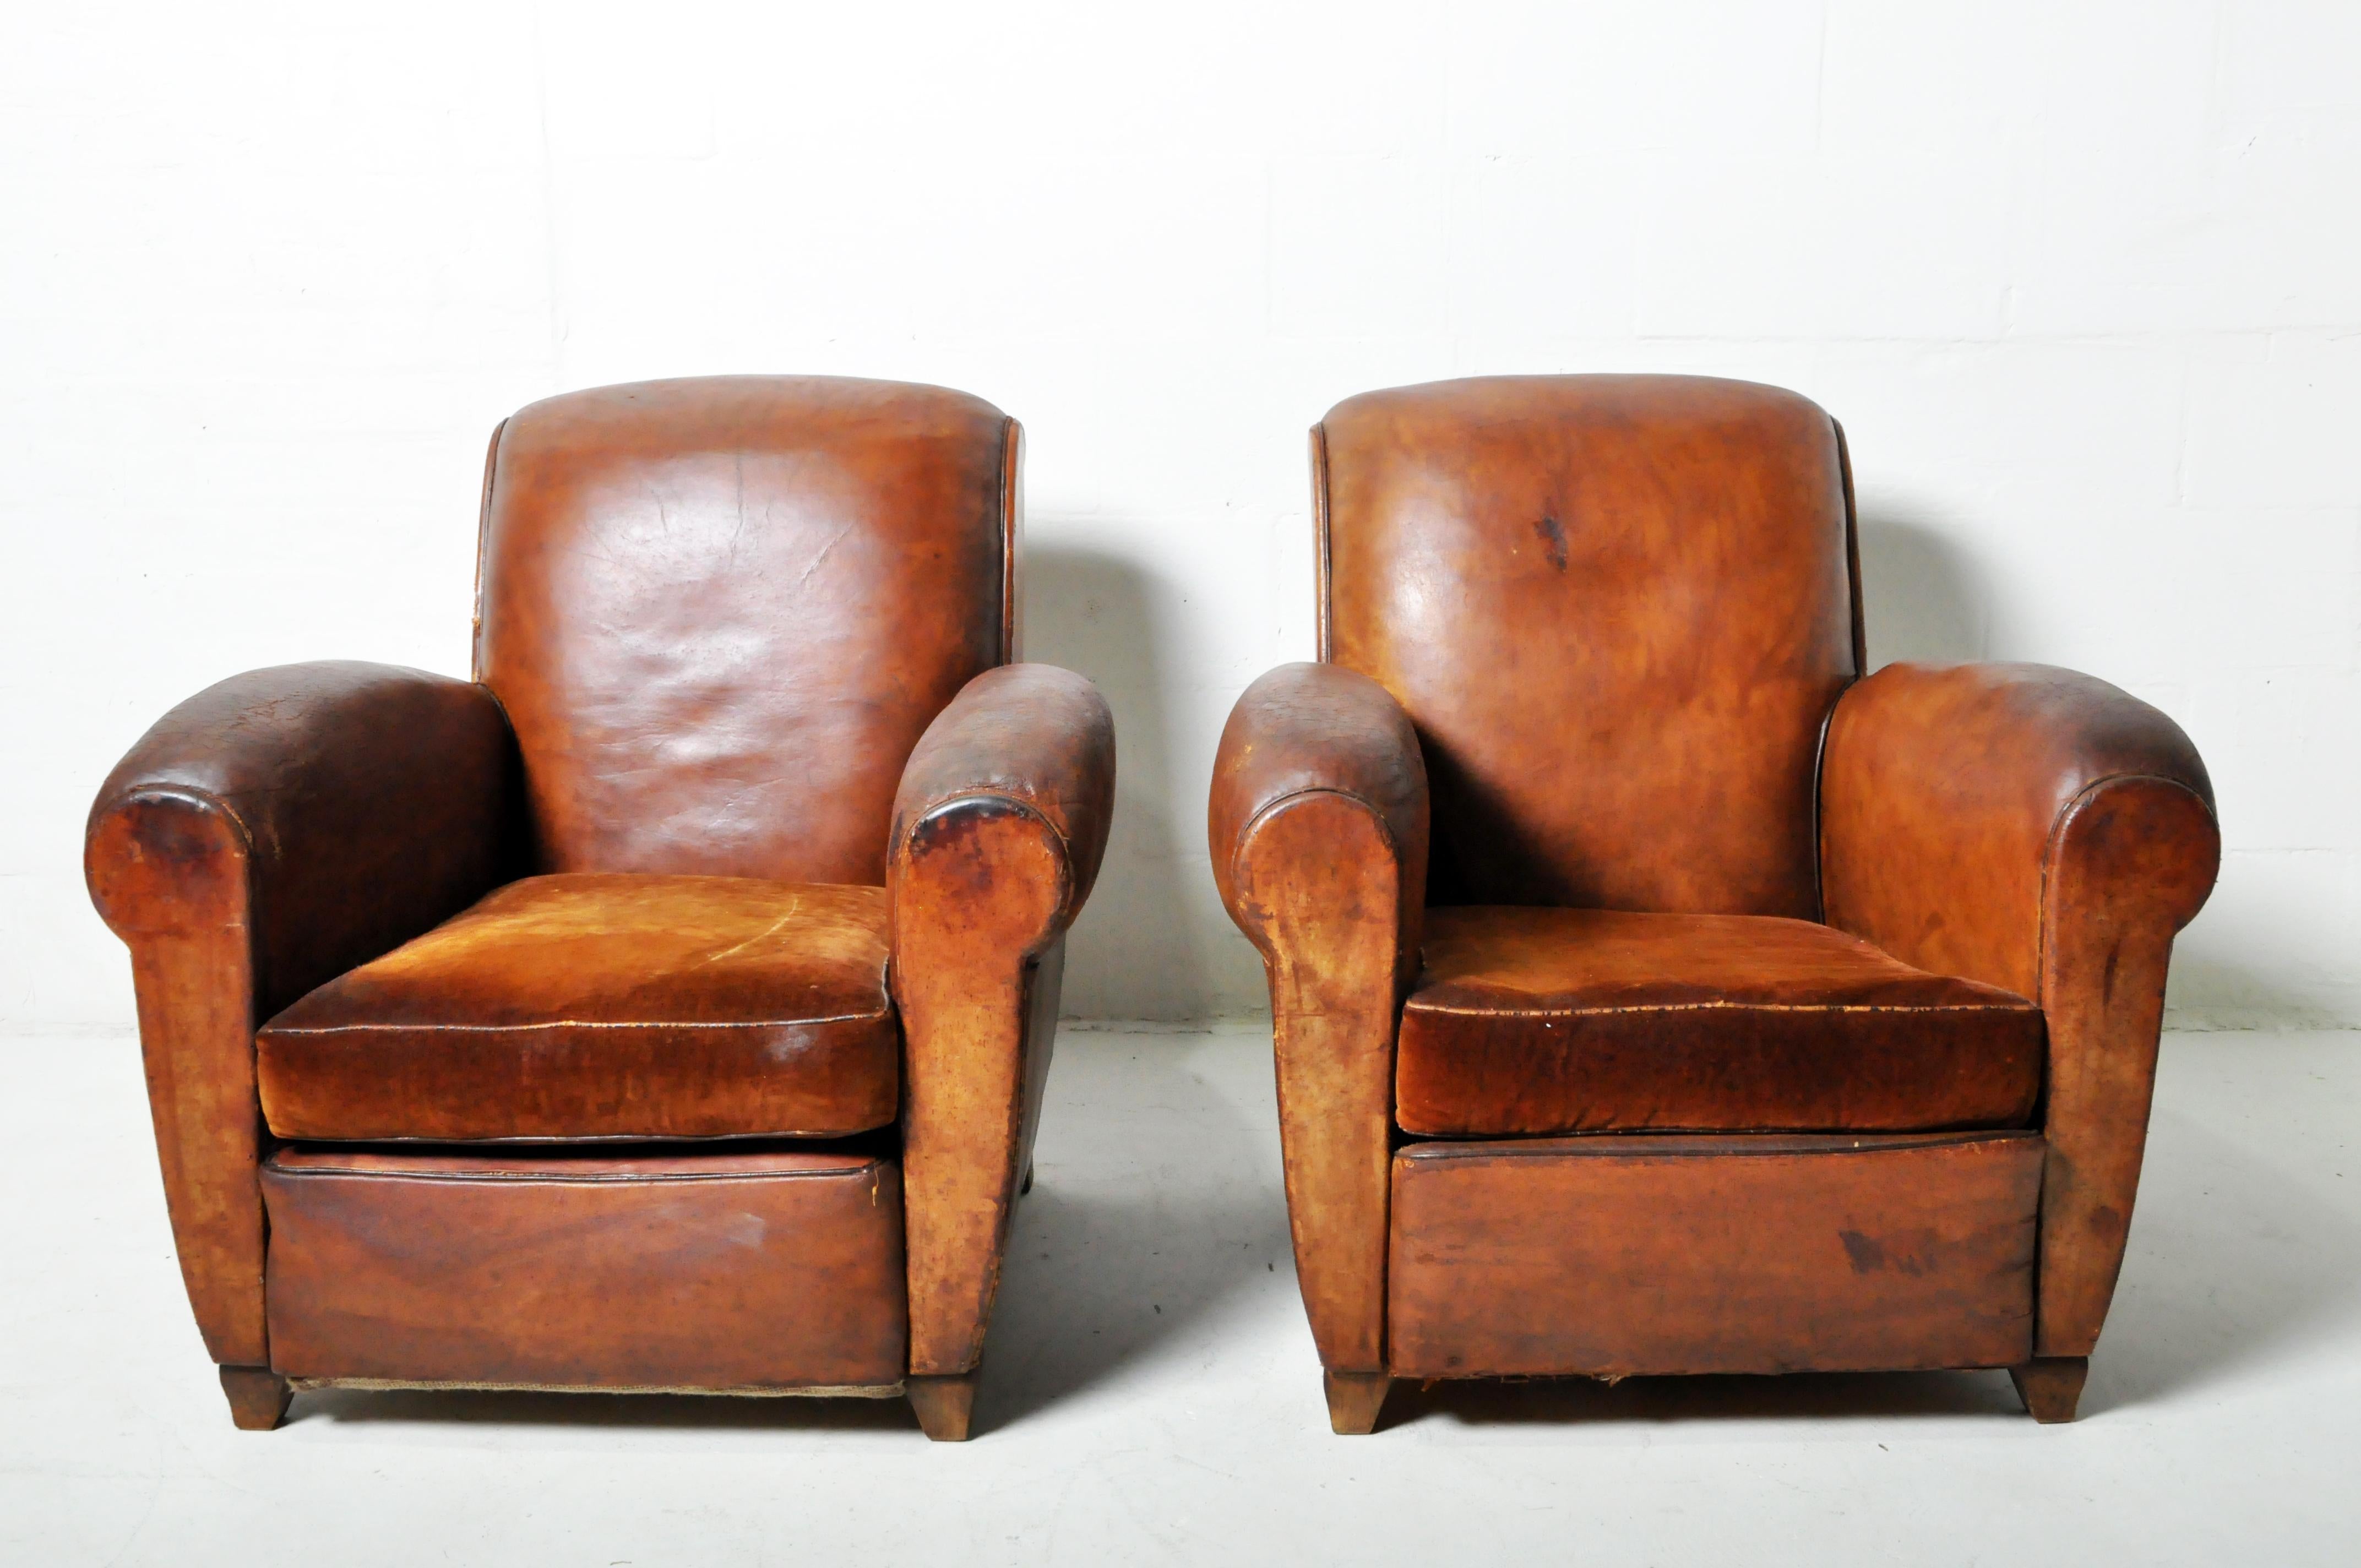 A vintage pair of French Art Deco leather club chairs with original patina. The seat cushions are vintage mohair velvet, a tasteful and expected replacement for worn-out leather cushions. The original springs have been re-tied and saved. The old